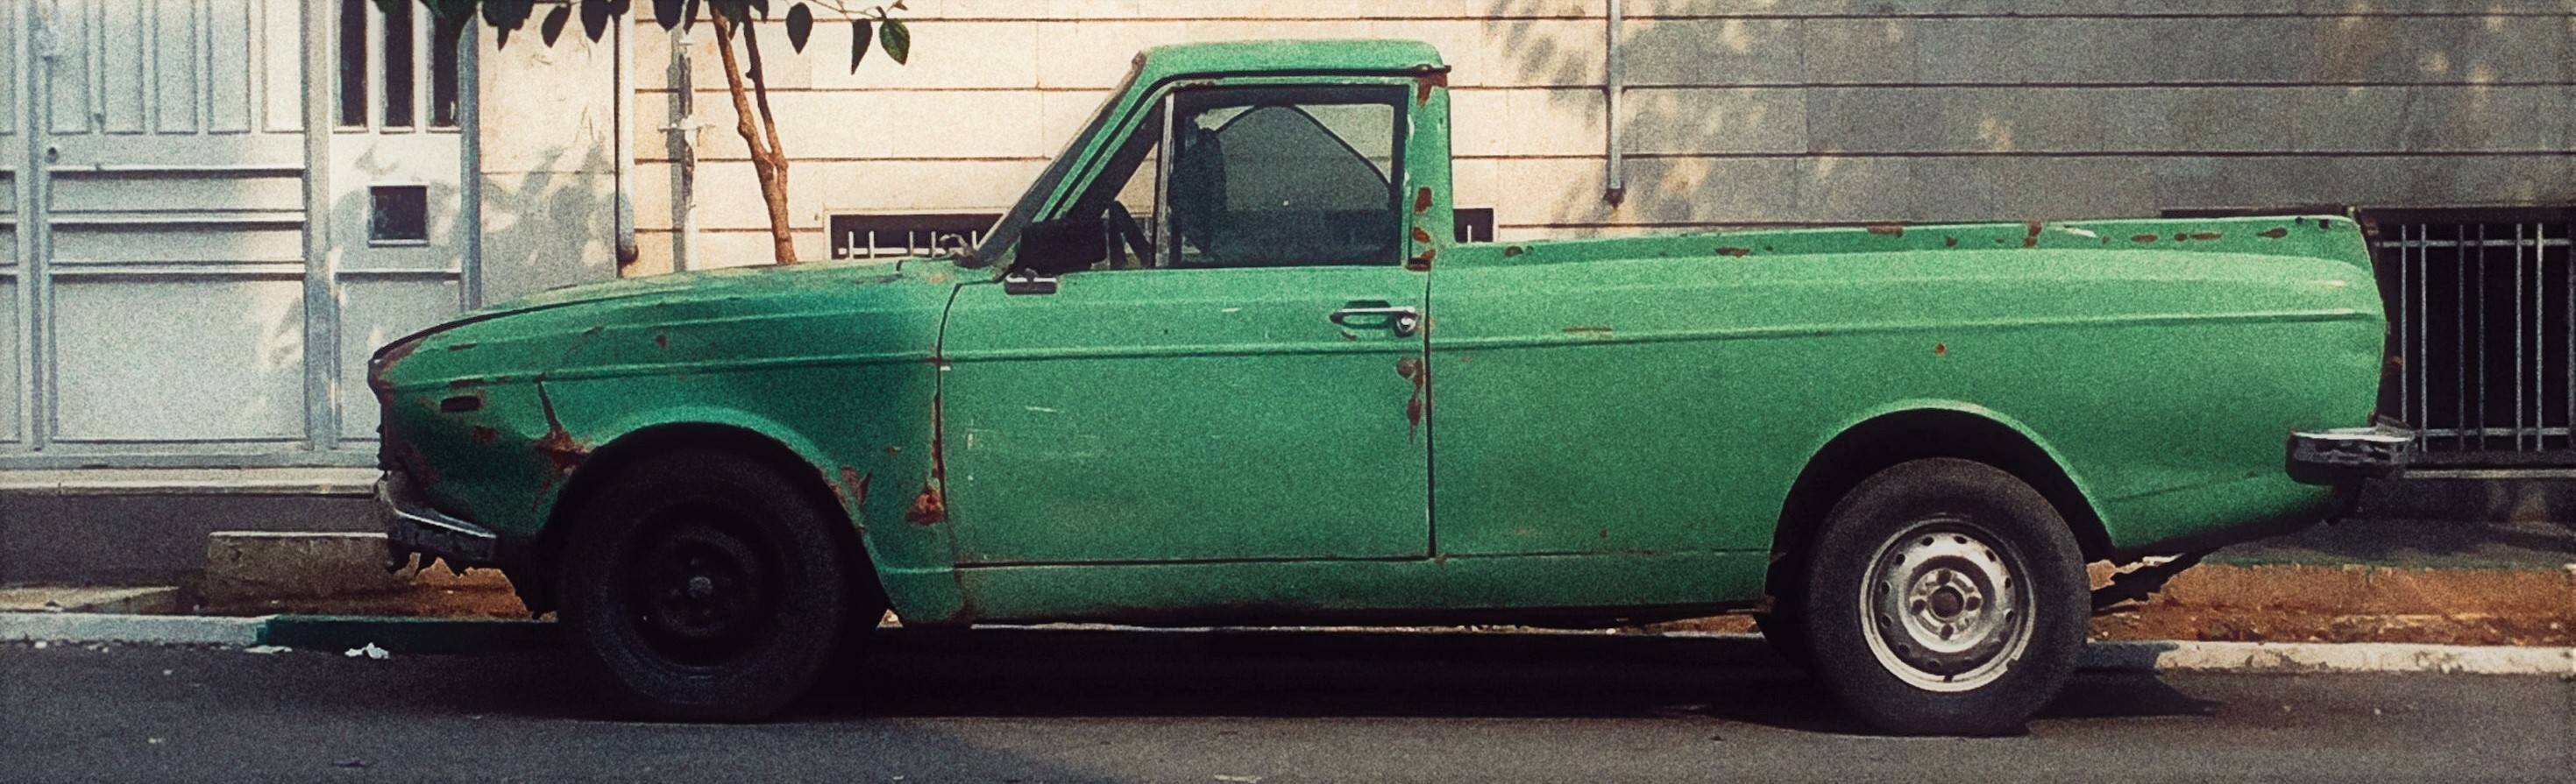 Green Oldtimer Truck | Breast Cancer Car Donations